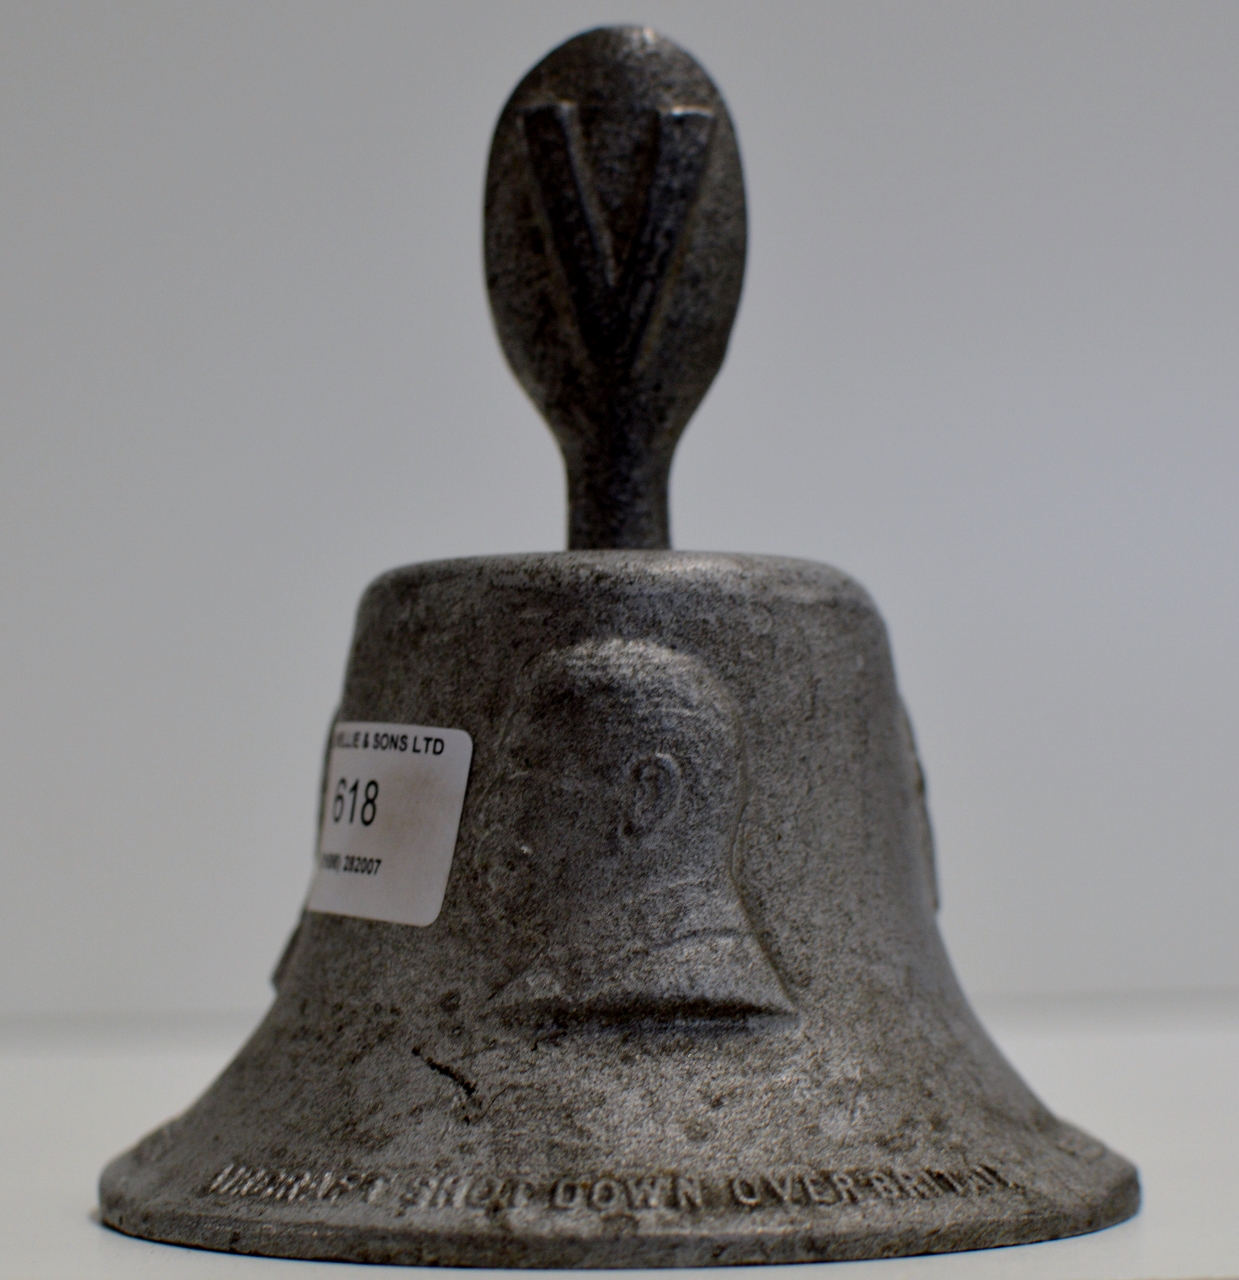 6" WW2 BRITISH RAF BENEVOLENT FUND ALLOY BELL CAST FROM METAL FROM SHOT DOWN GERMAN AIRCRAFT OVER